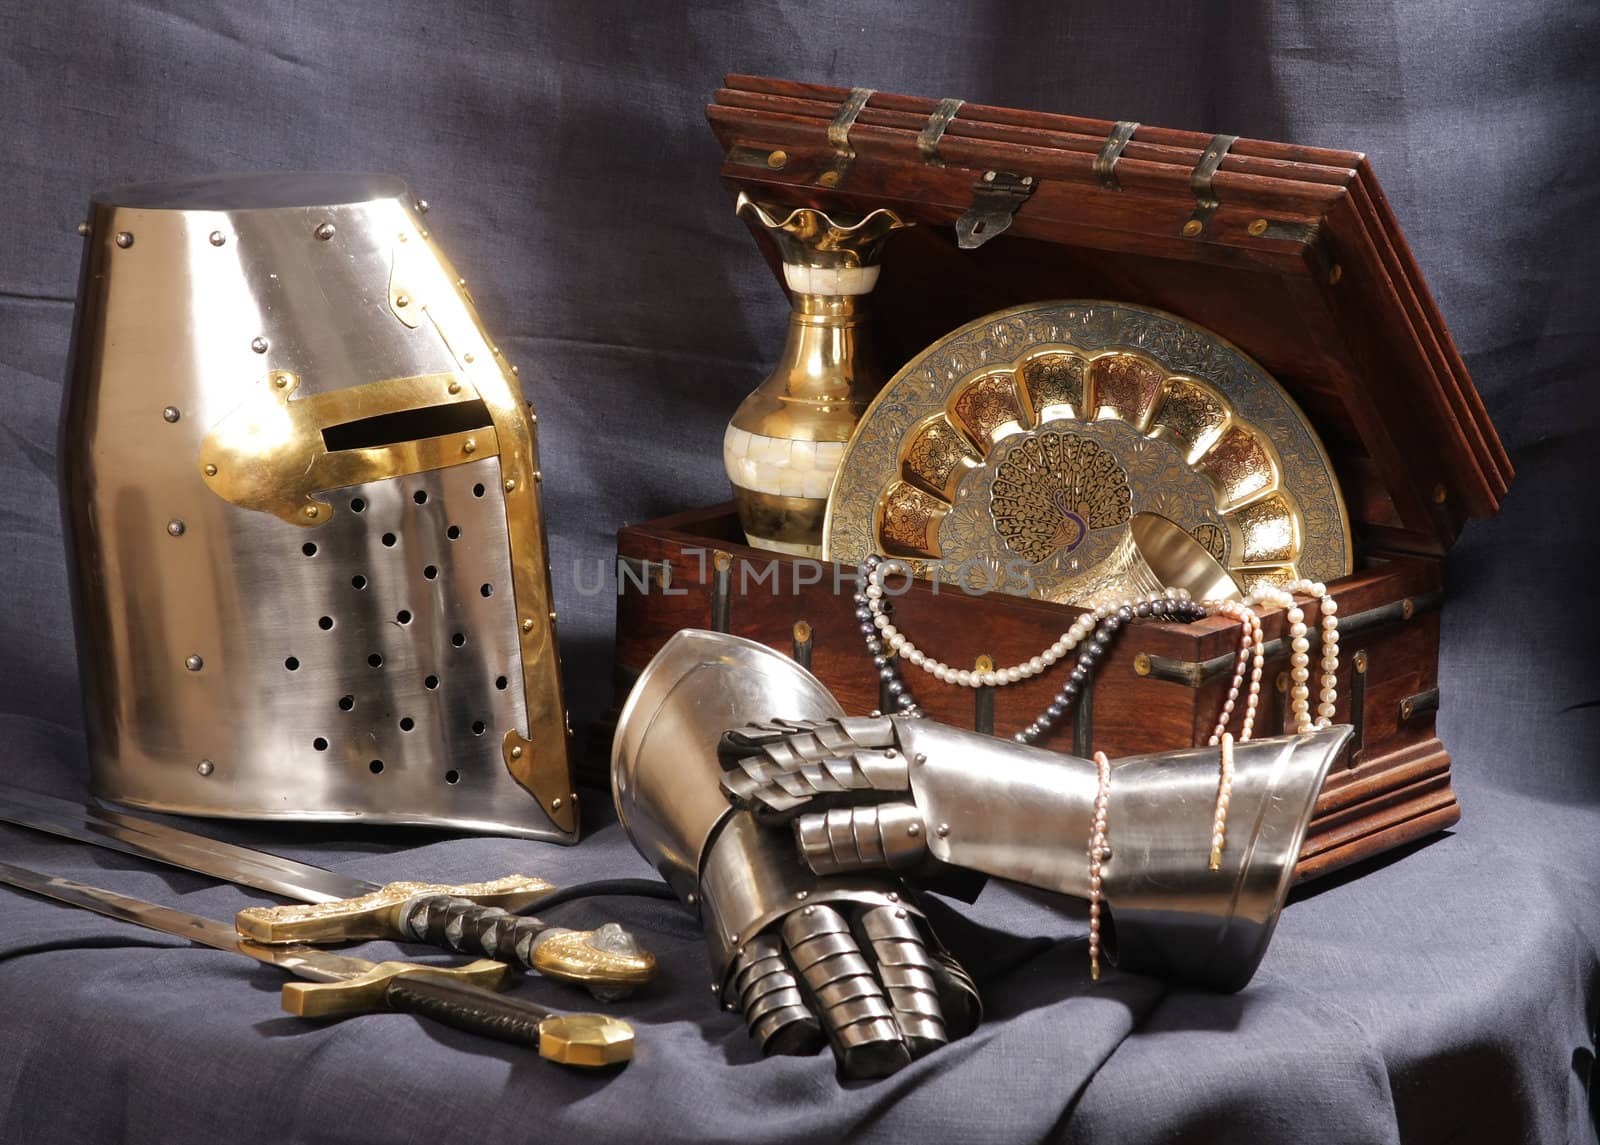 Still-life with an armour, the weapon and treasures